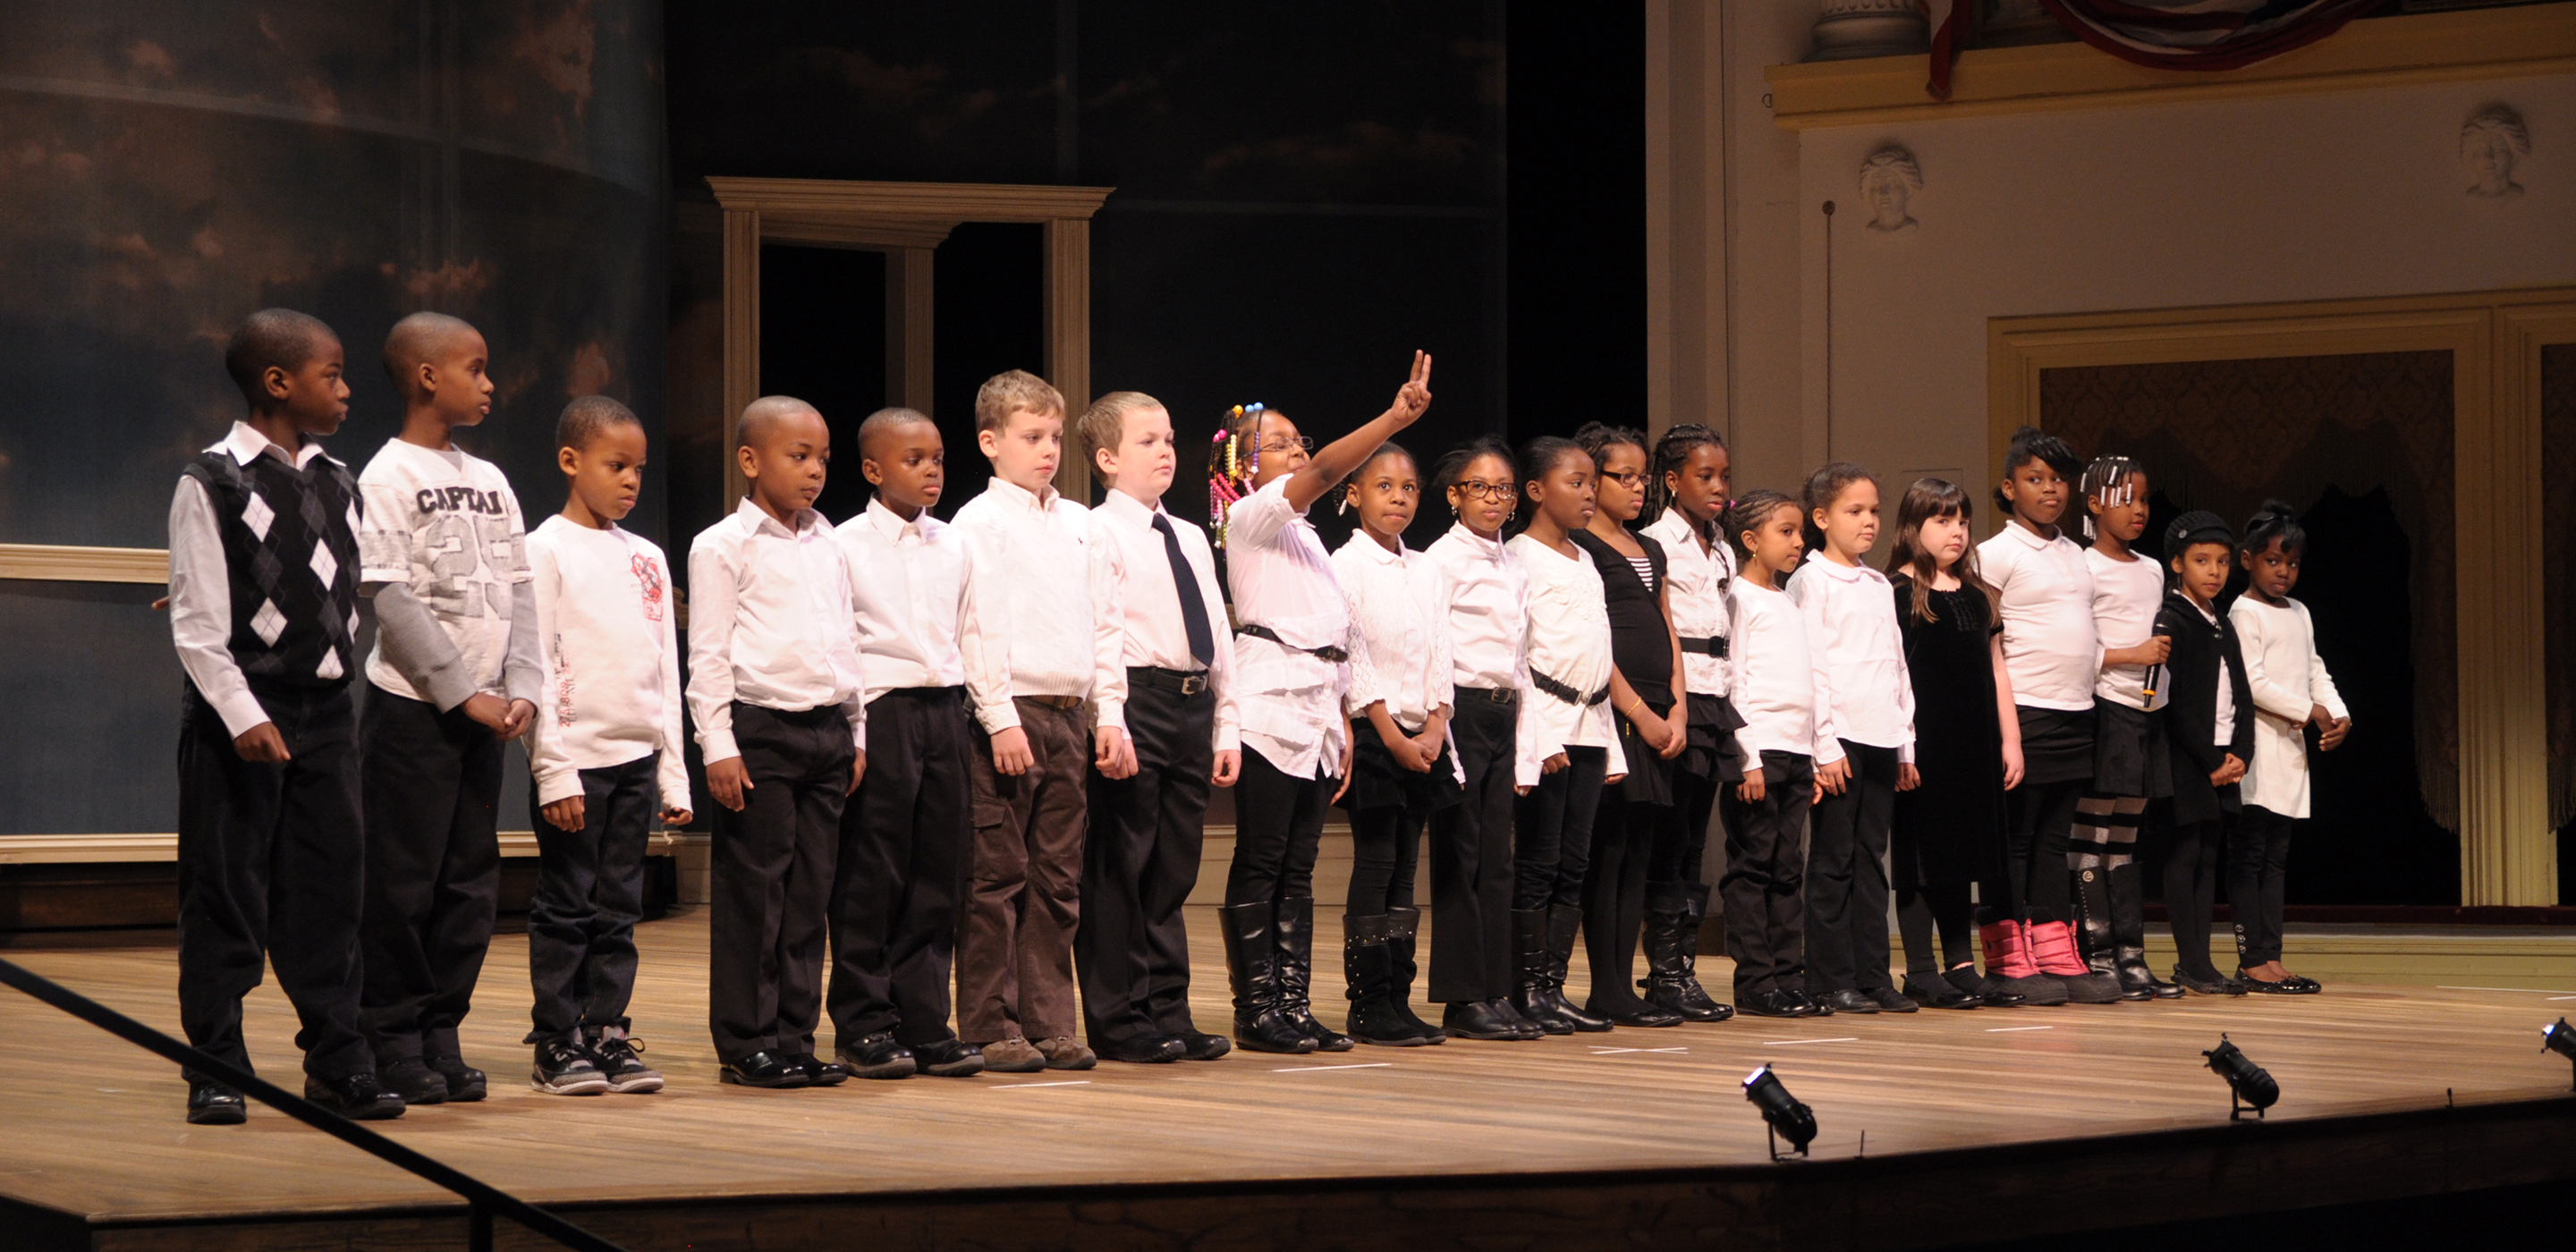 A row of children dressed mostly in white shirts and black pants stand in a line on a stage.